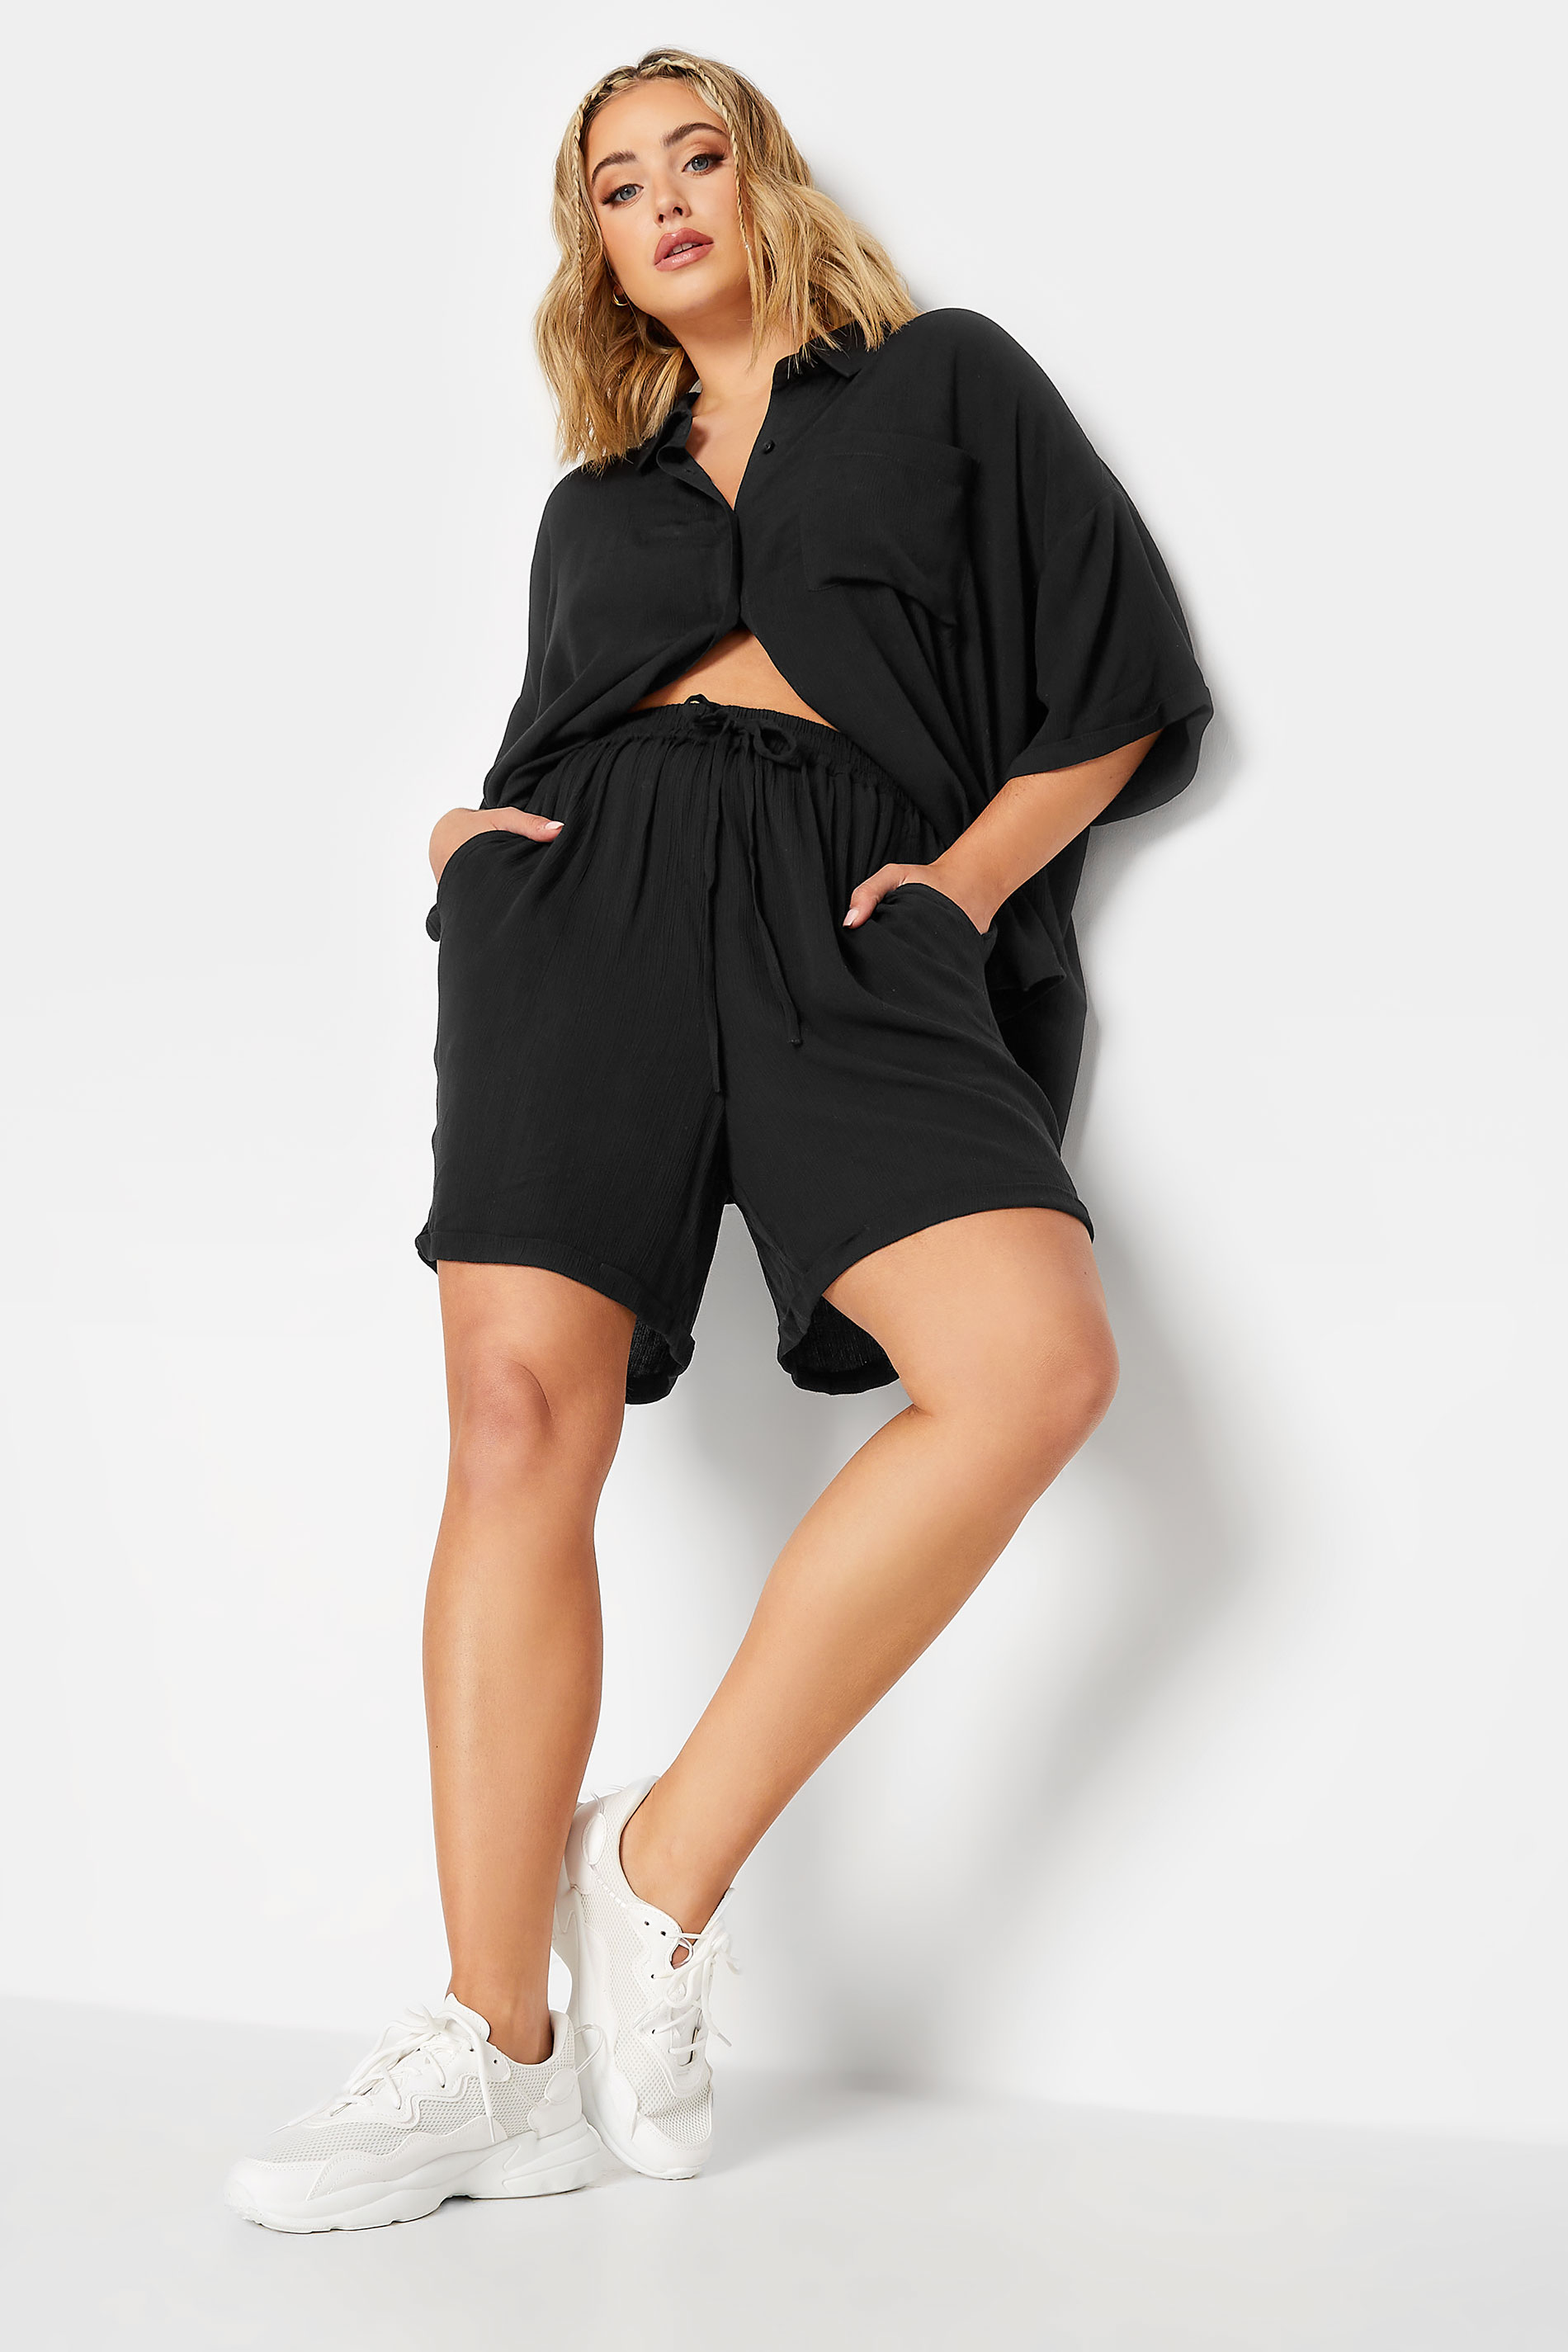 LIMITED COLLECTION Plus Size Black Crinkle Shirt | Yours Clothing 3